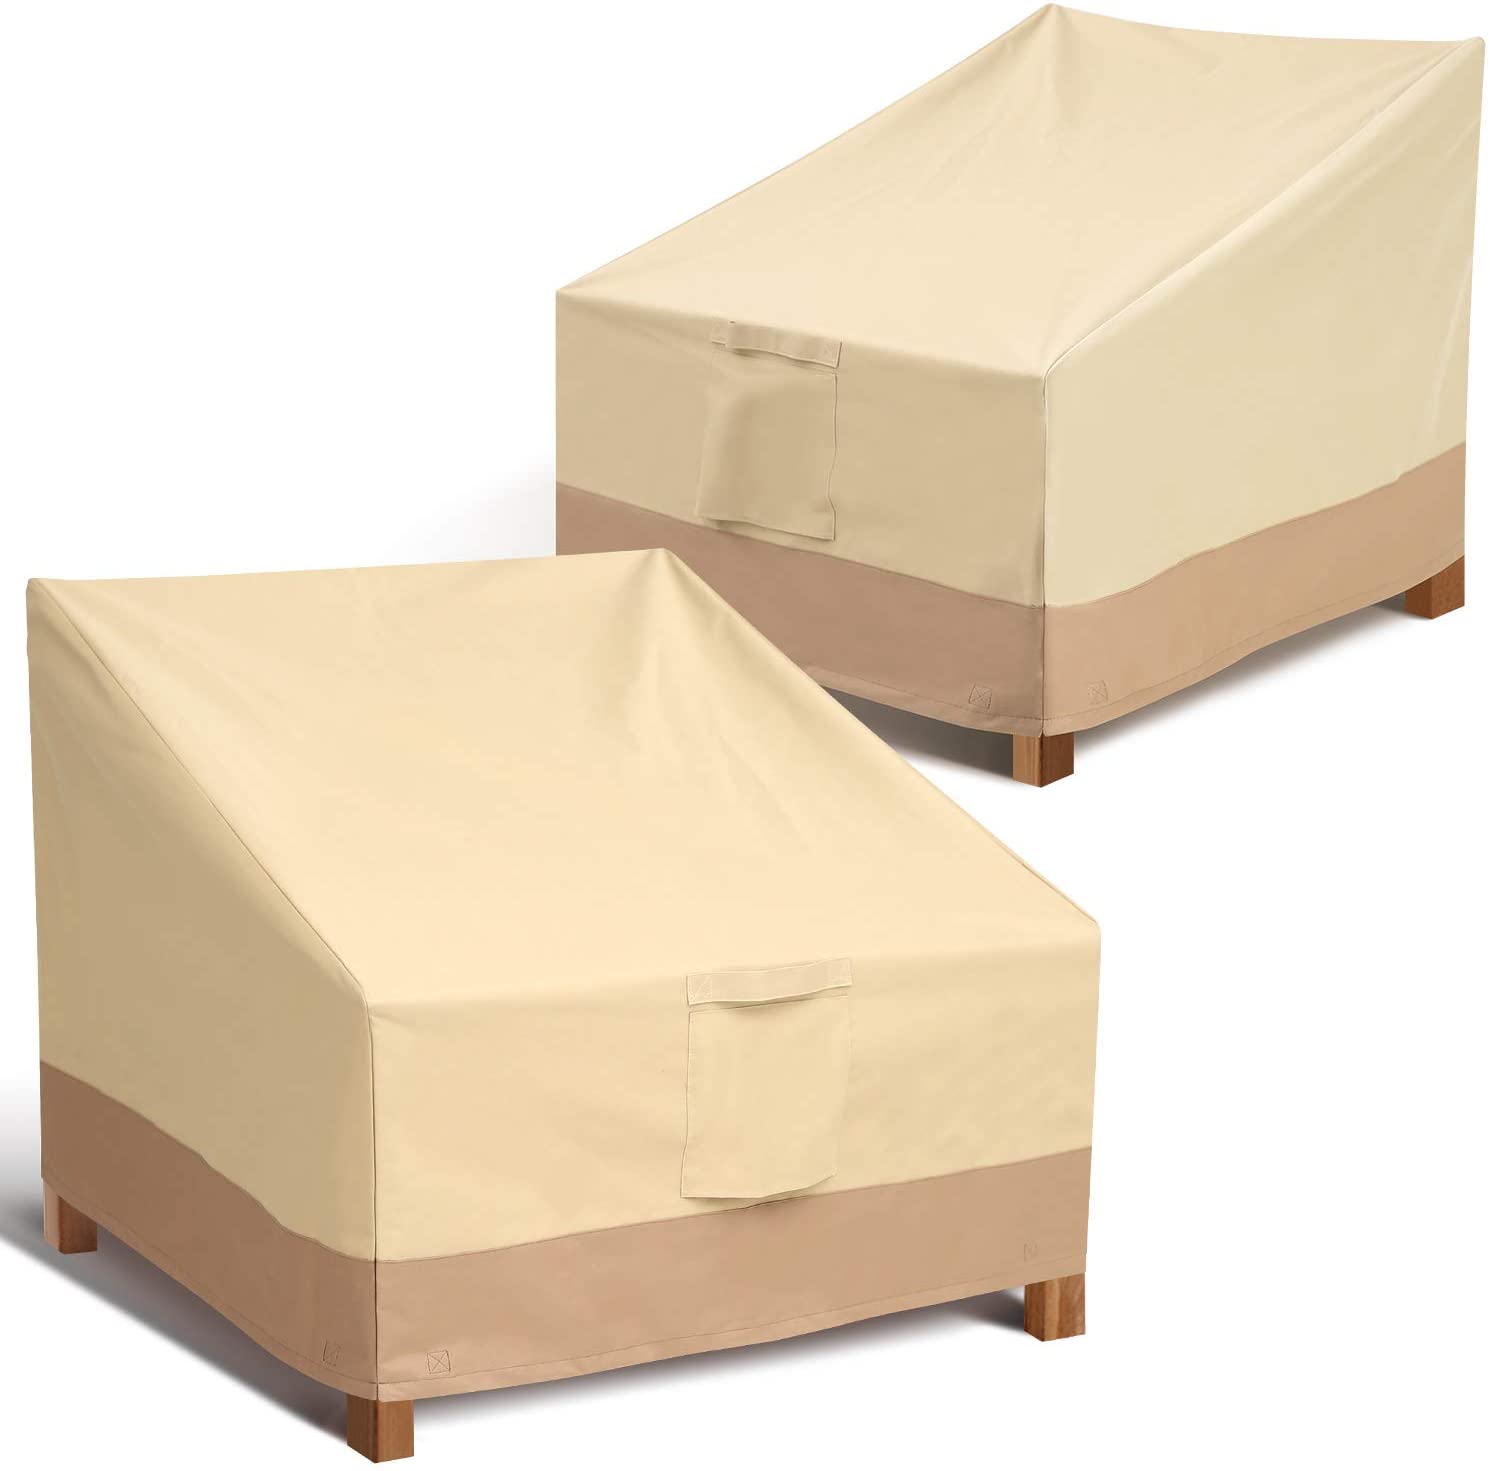 Leafbay Vented Outdoor Chair Patio Furniture Cover, 2-Pack